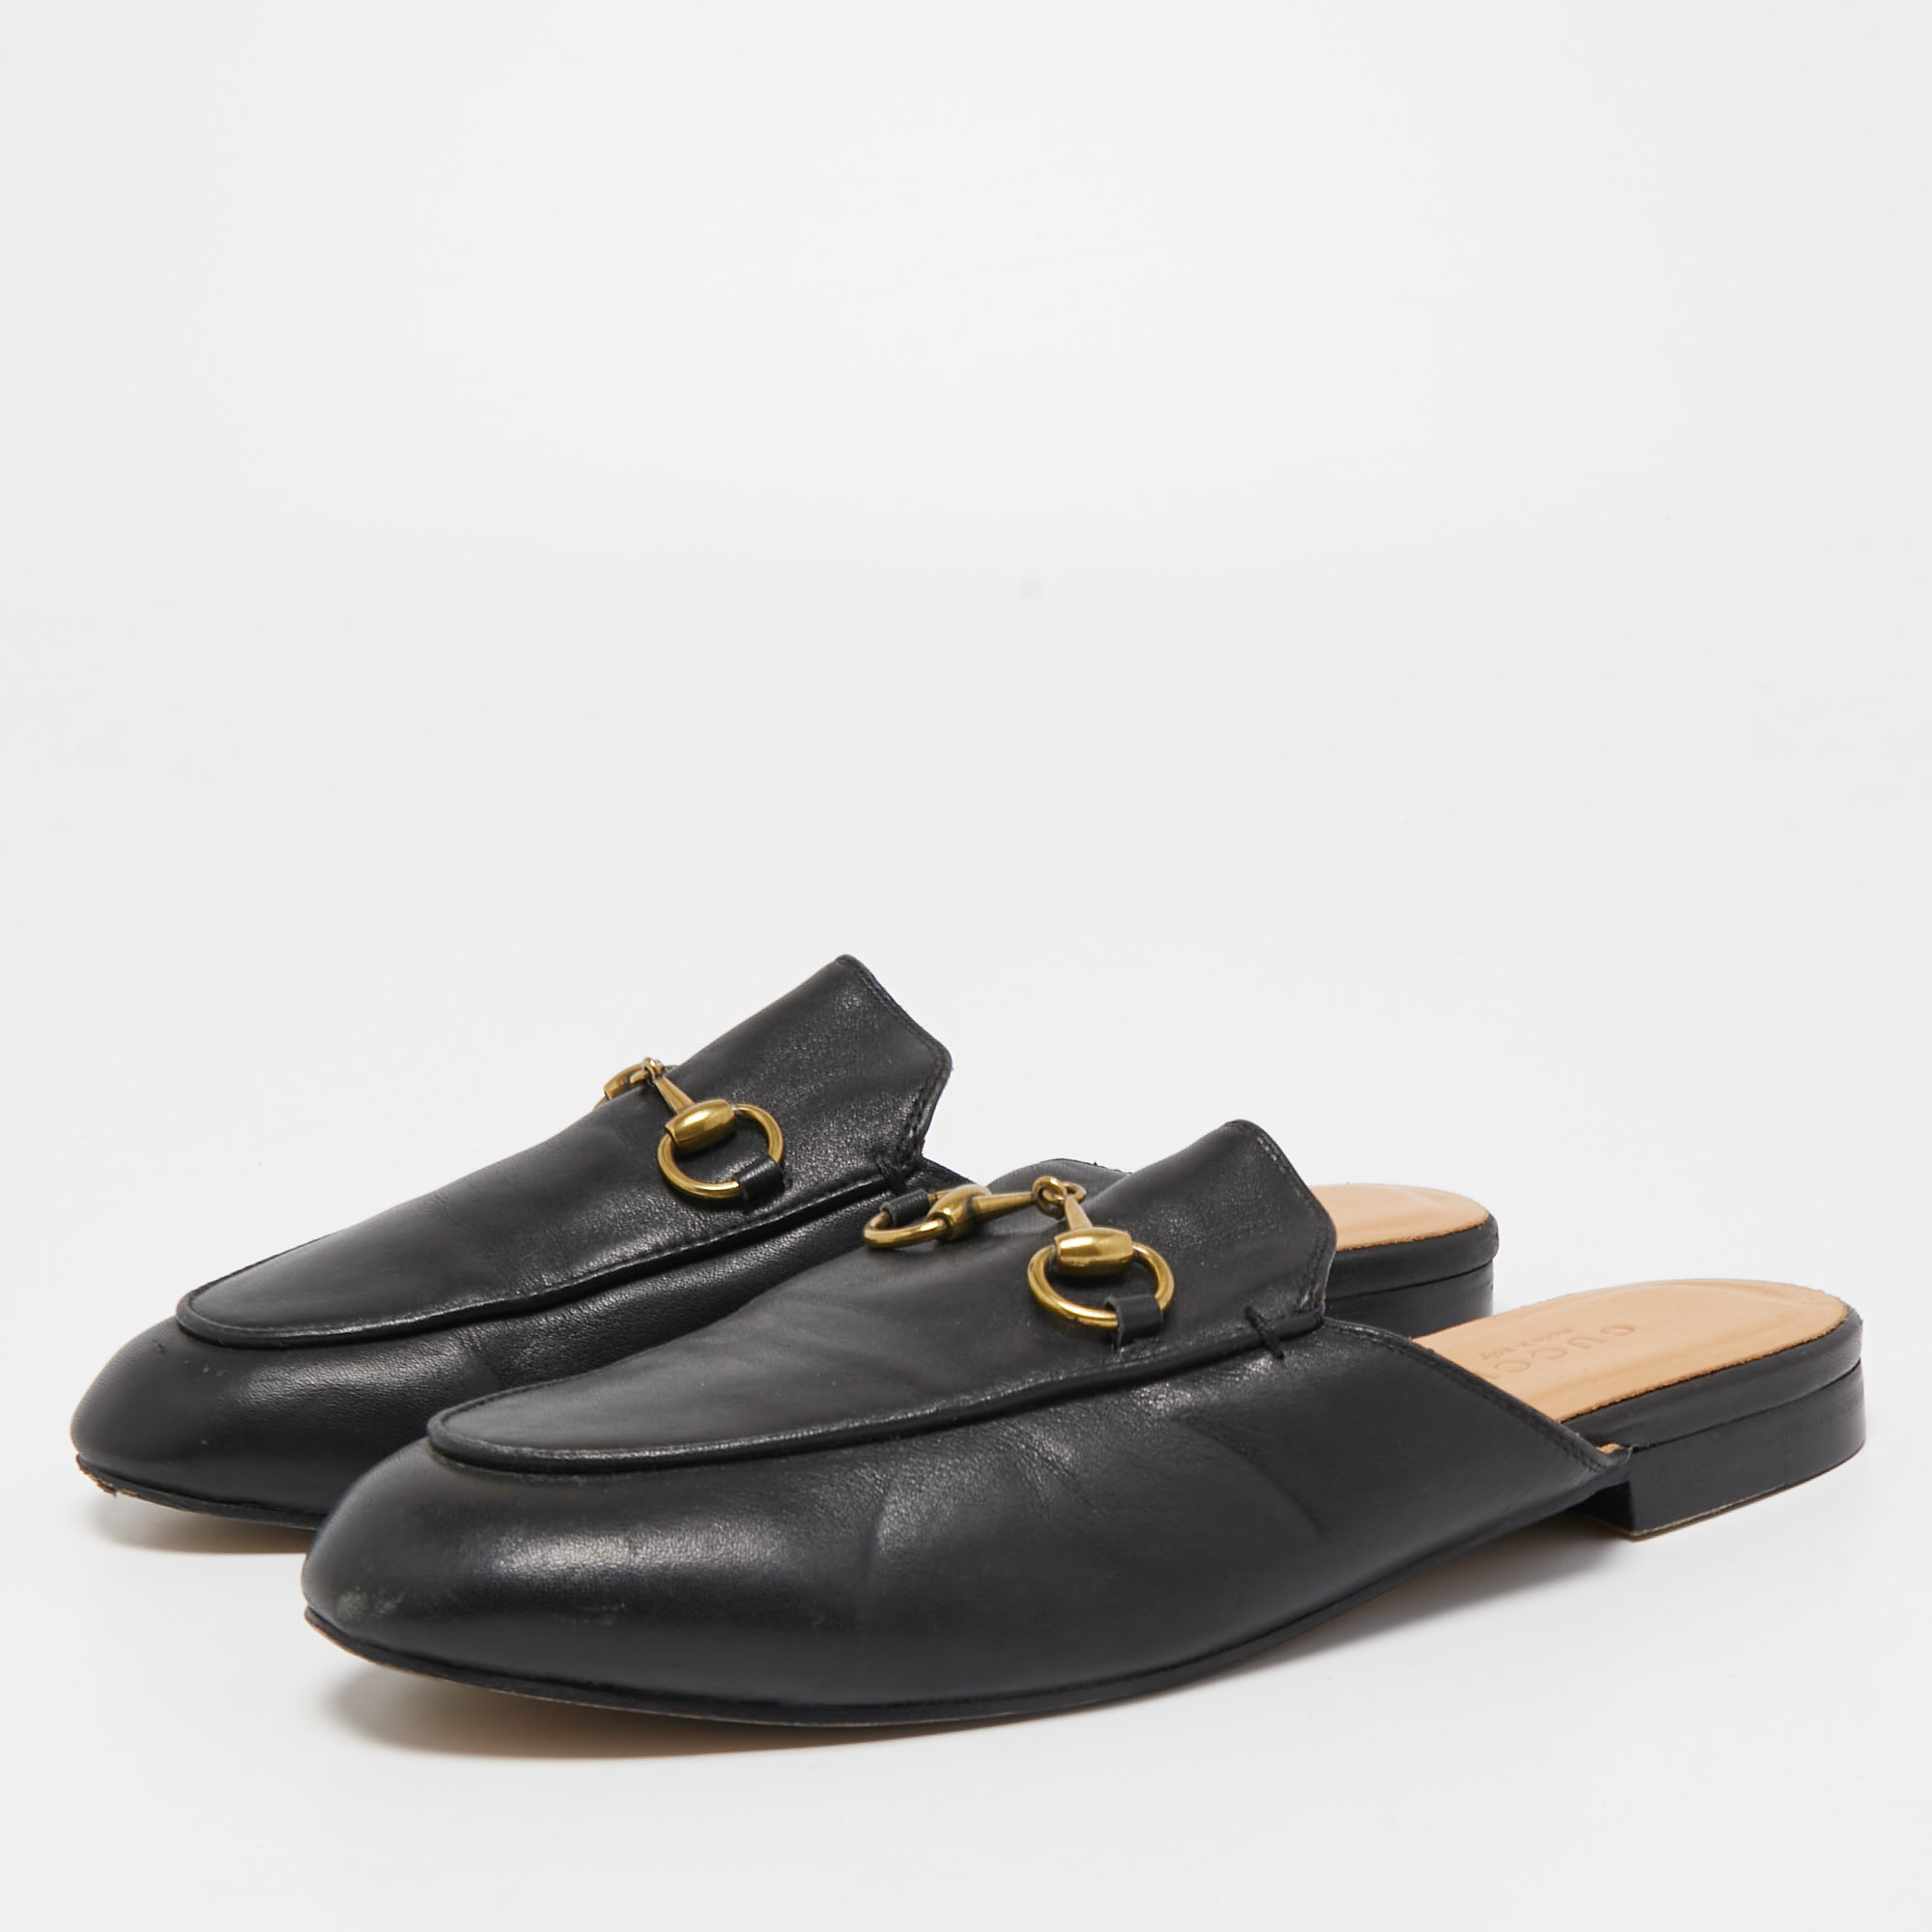 

Gucci Black Leather Princetown Flat Mules Size